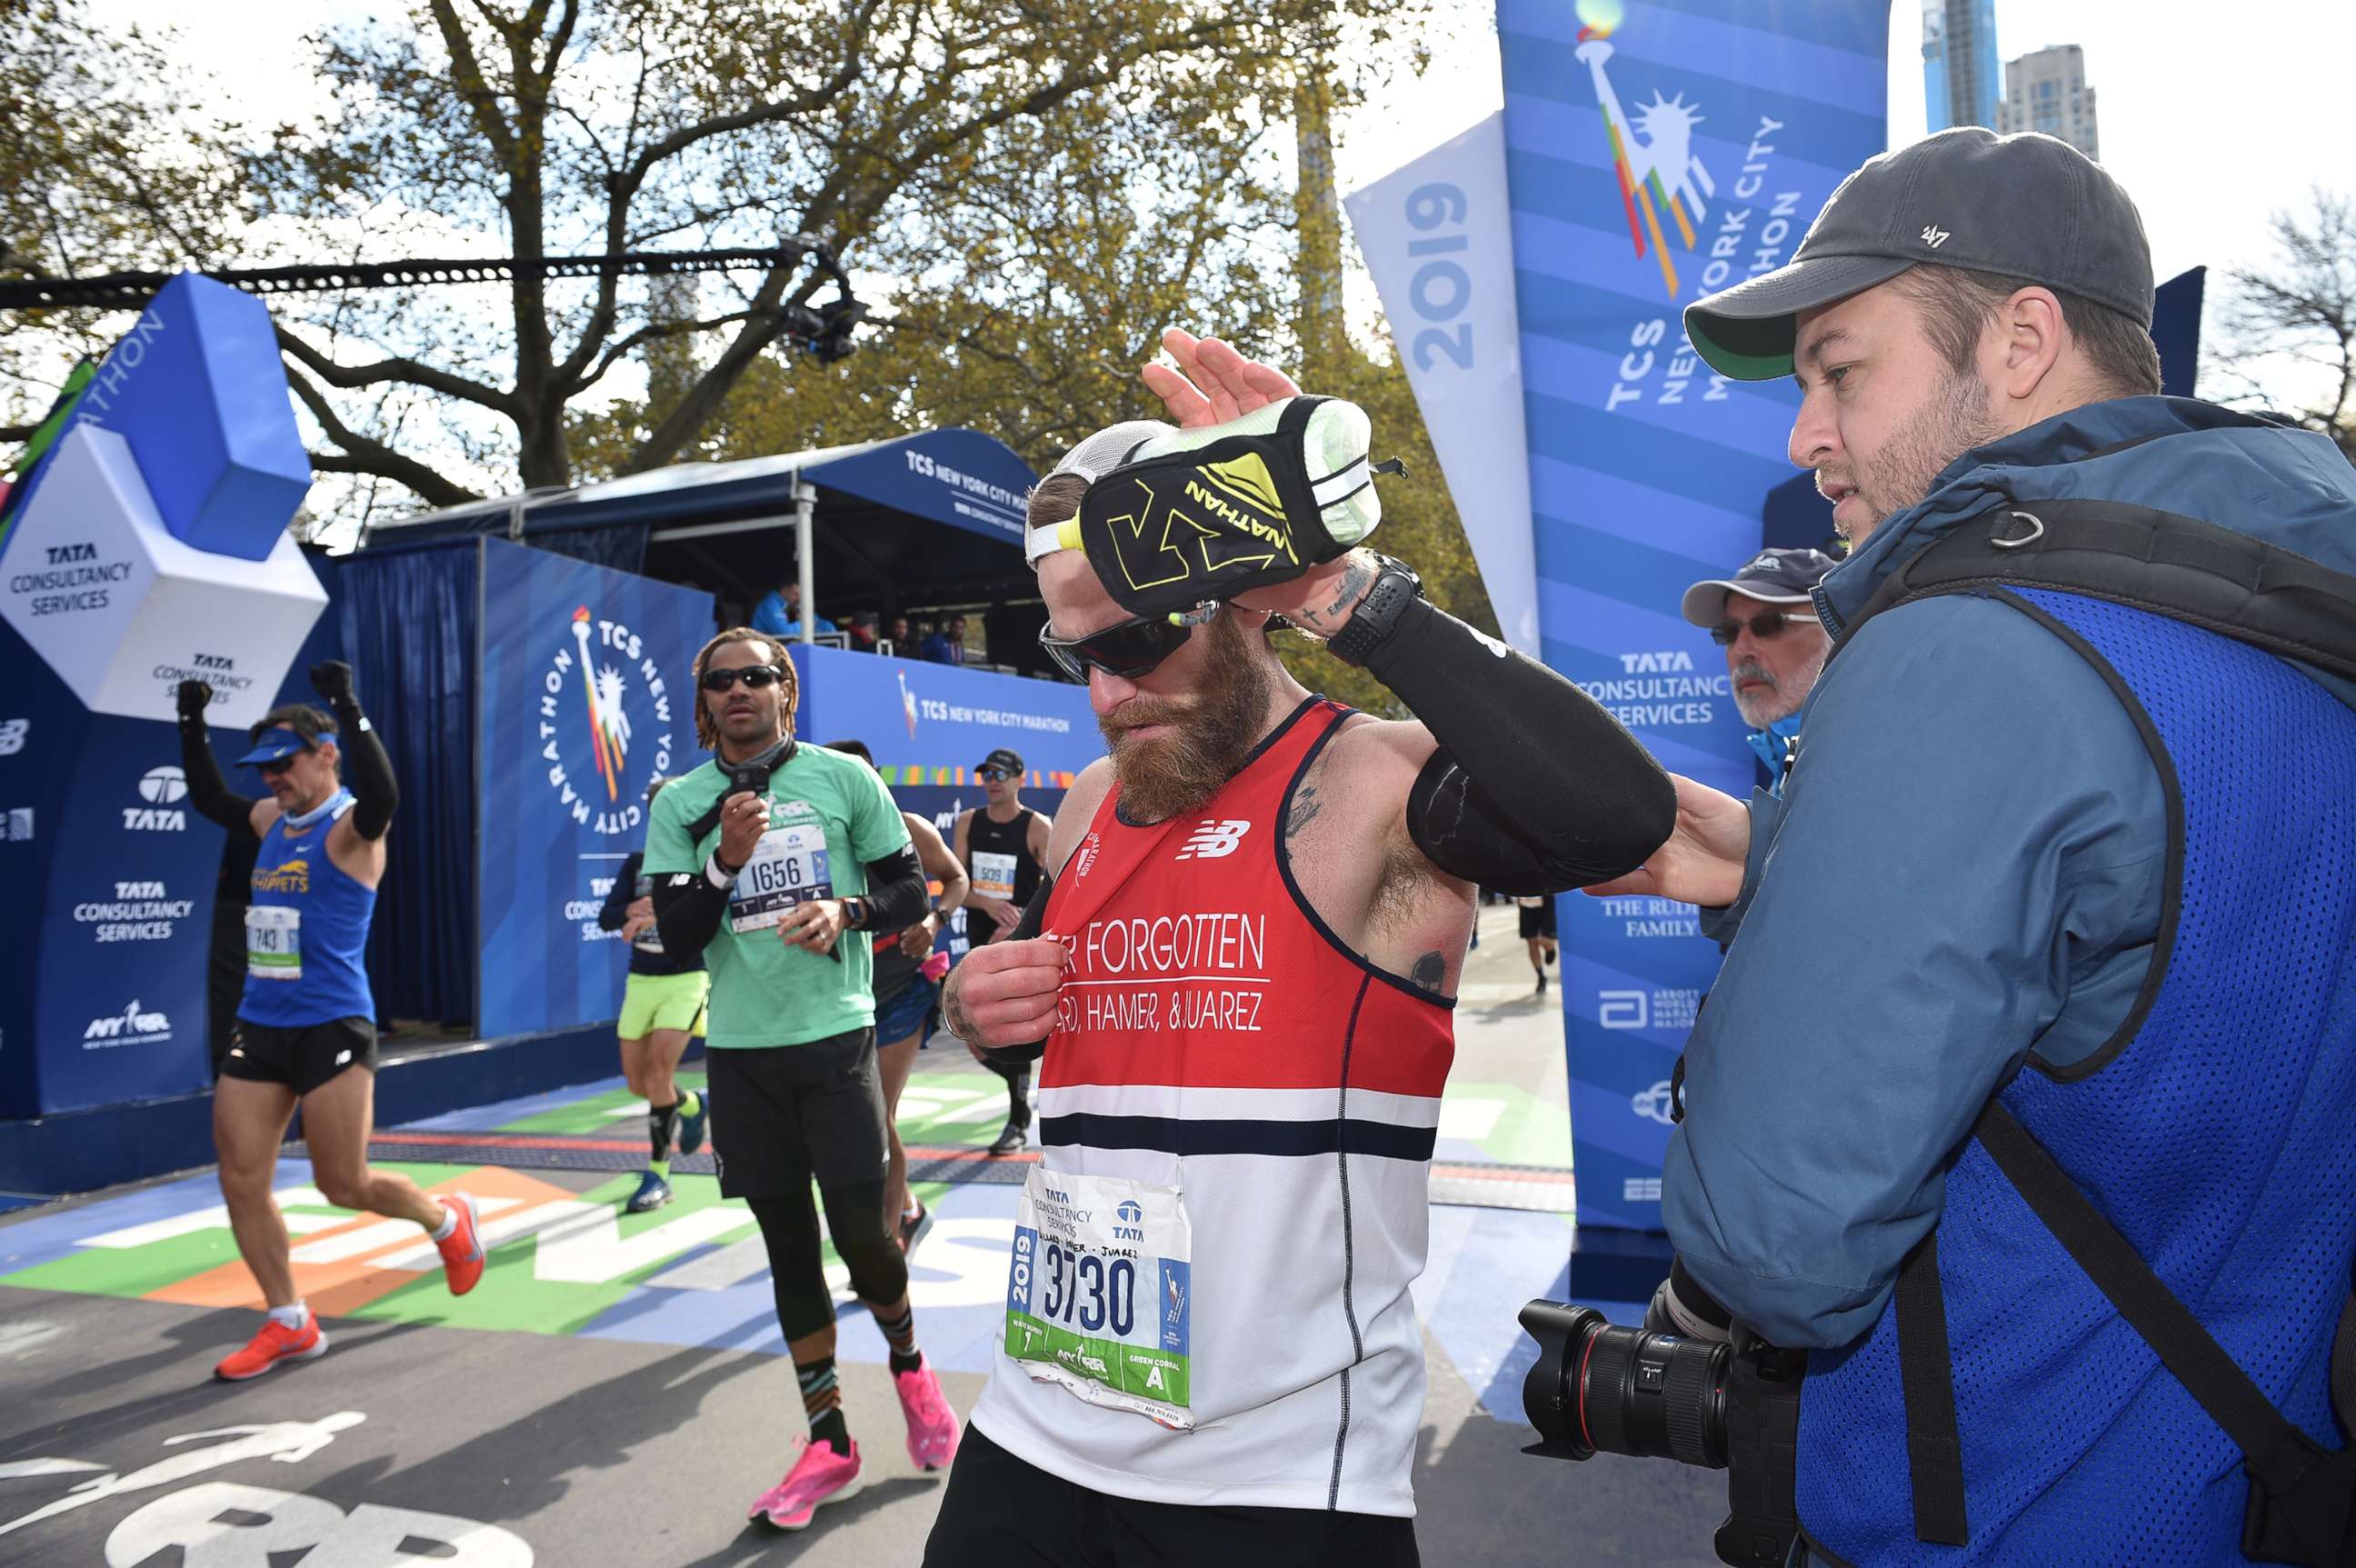 Marine vet stands tall at NYC Marathon after crawling to finish in